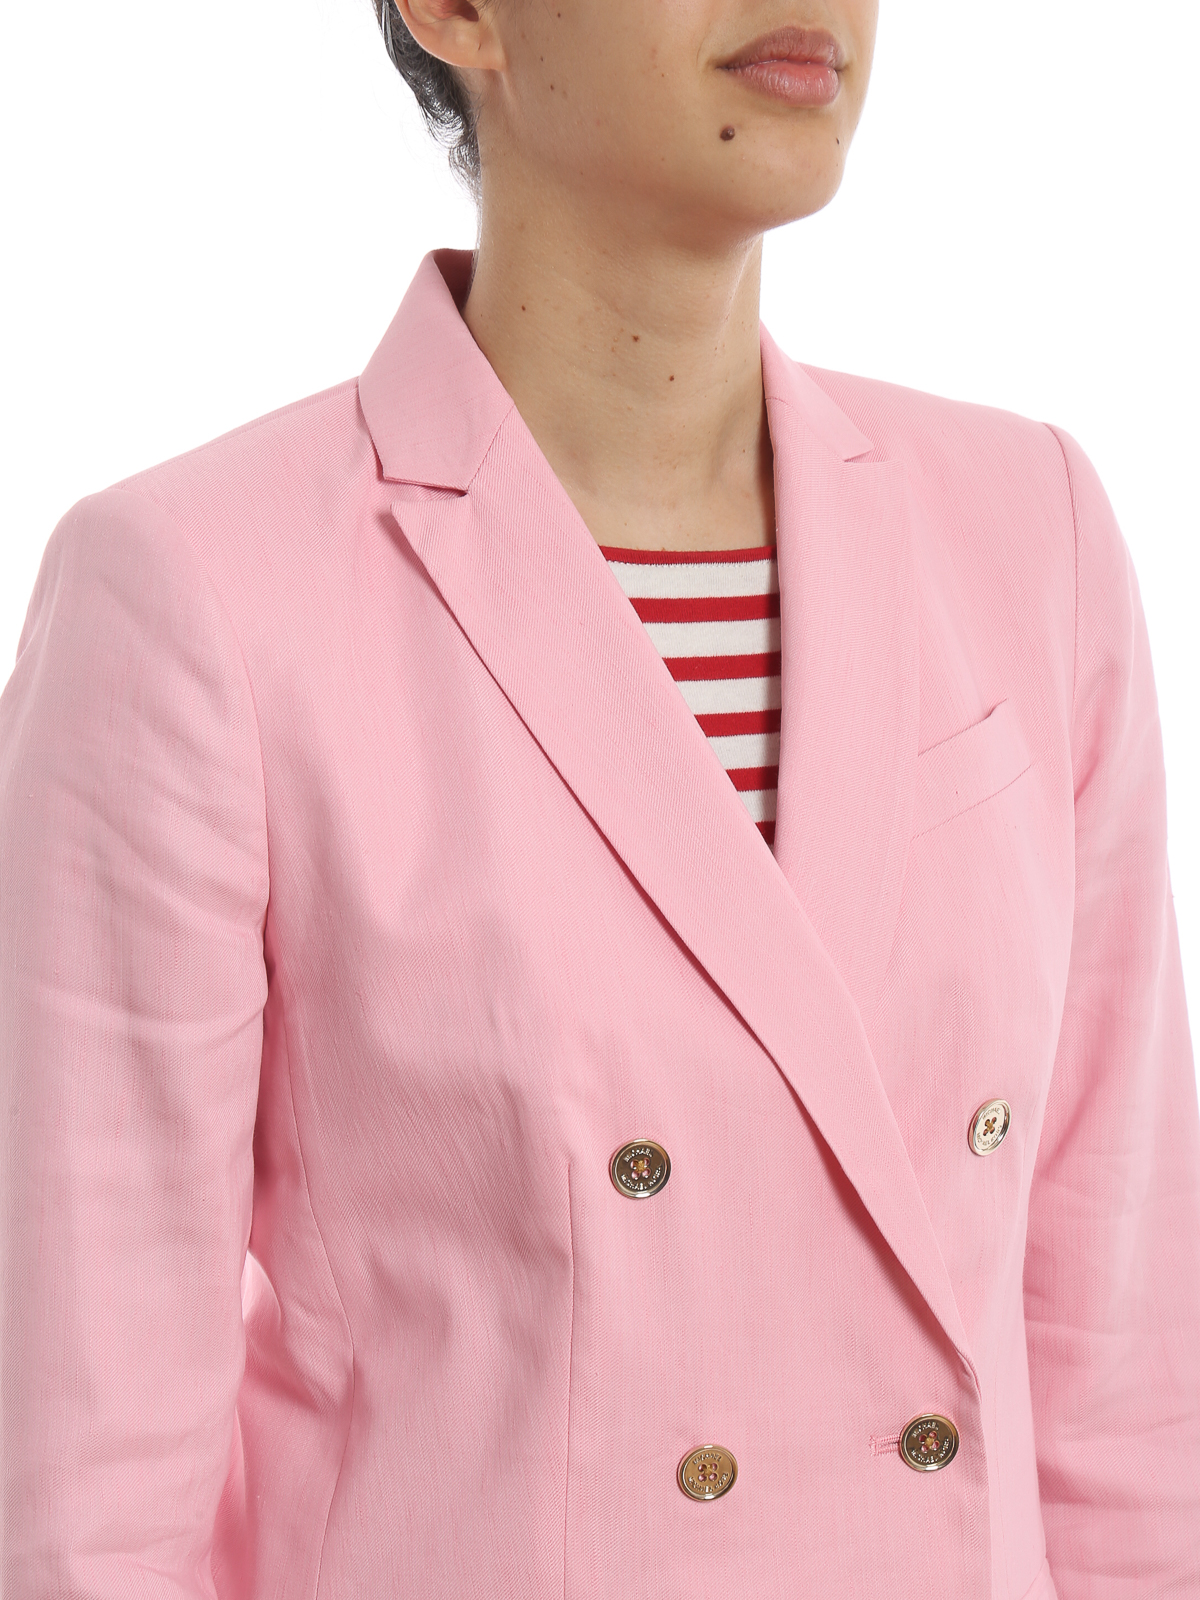 Blazers Michael Kors - Pink linen blend double-breasted blazer -  MS91EUFB4H657